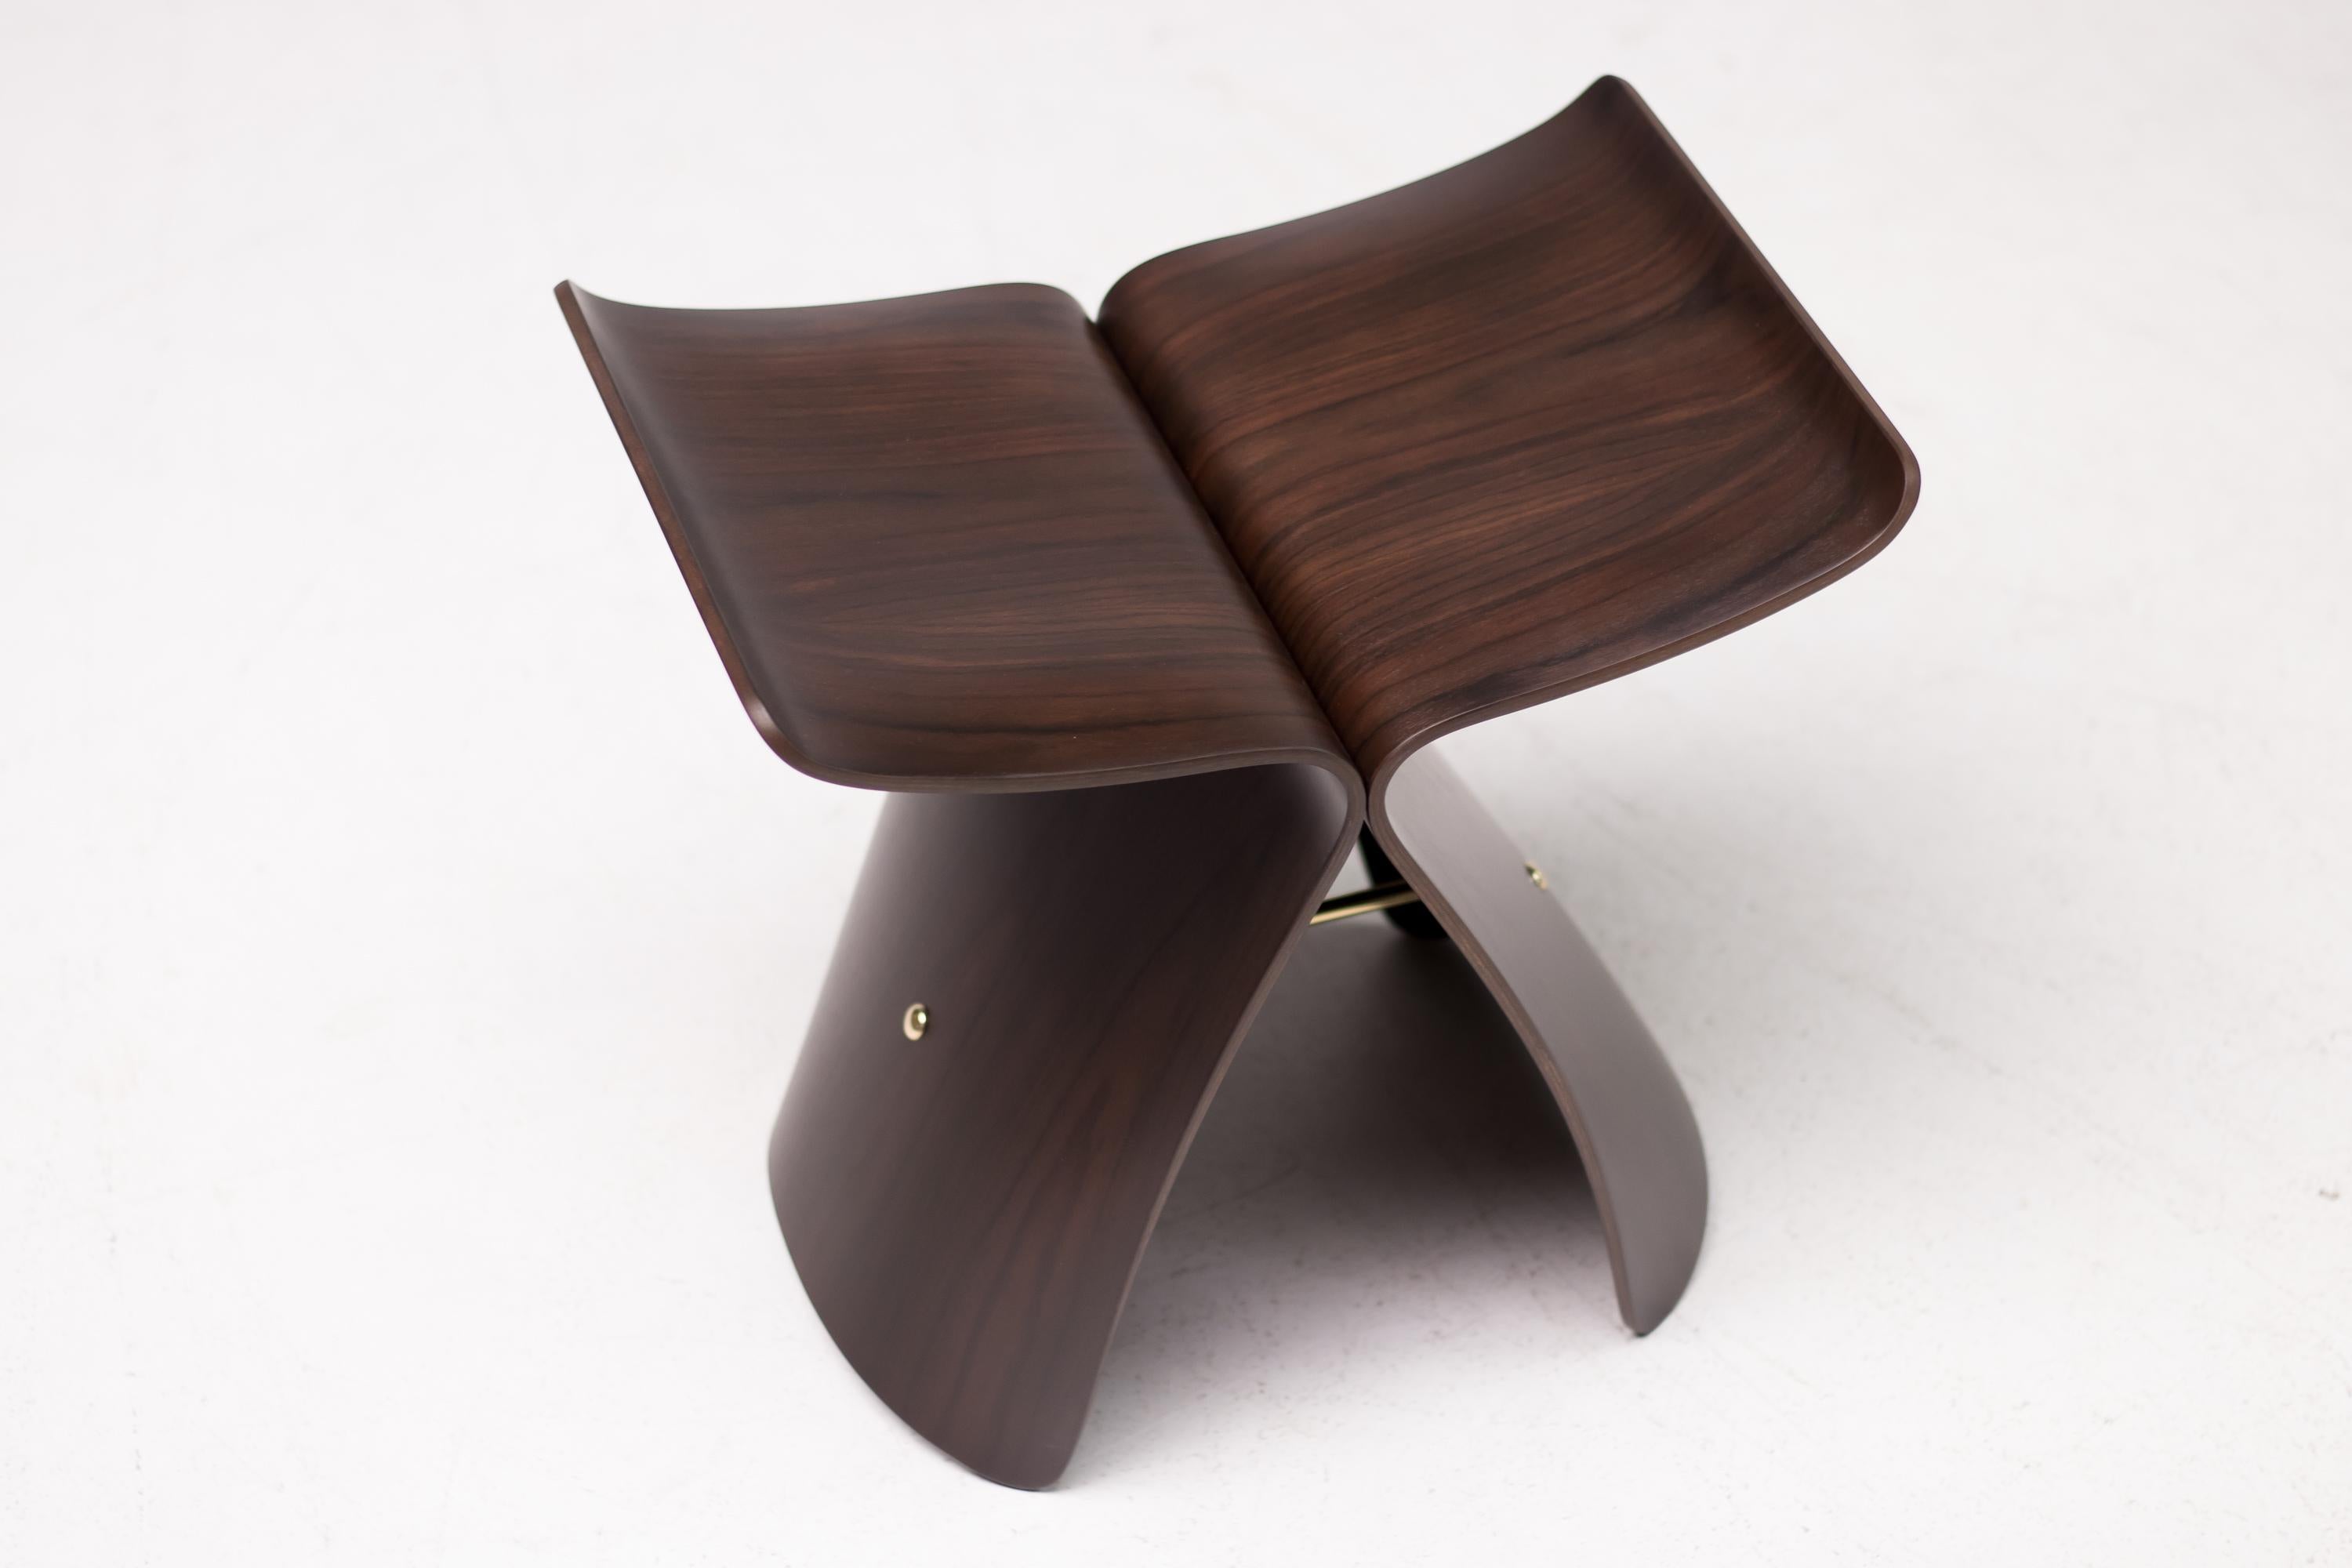 A perfect fusion of western function and eastern or Asian sensibility, the iconic butterfly stool was originally conceived in 1954 by Japanese designer Sori Yanagi. The stool is made from two curving and inverted L-shaped rosewood sections, each